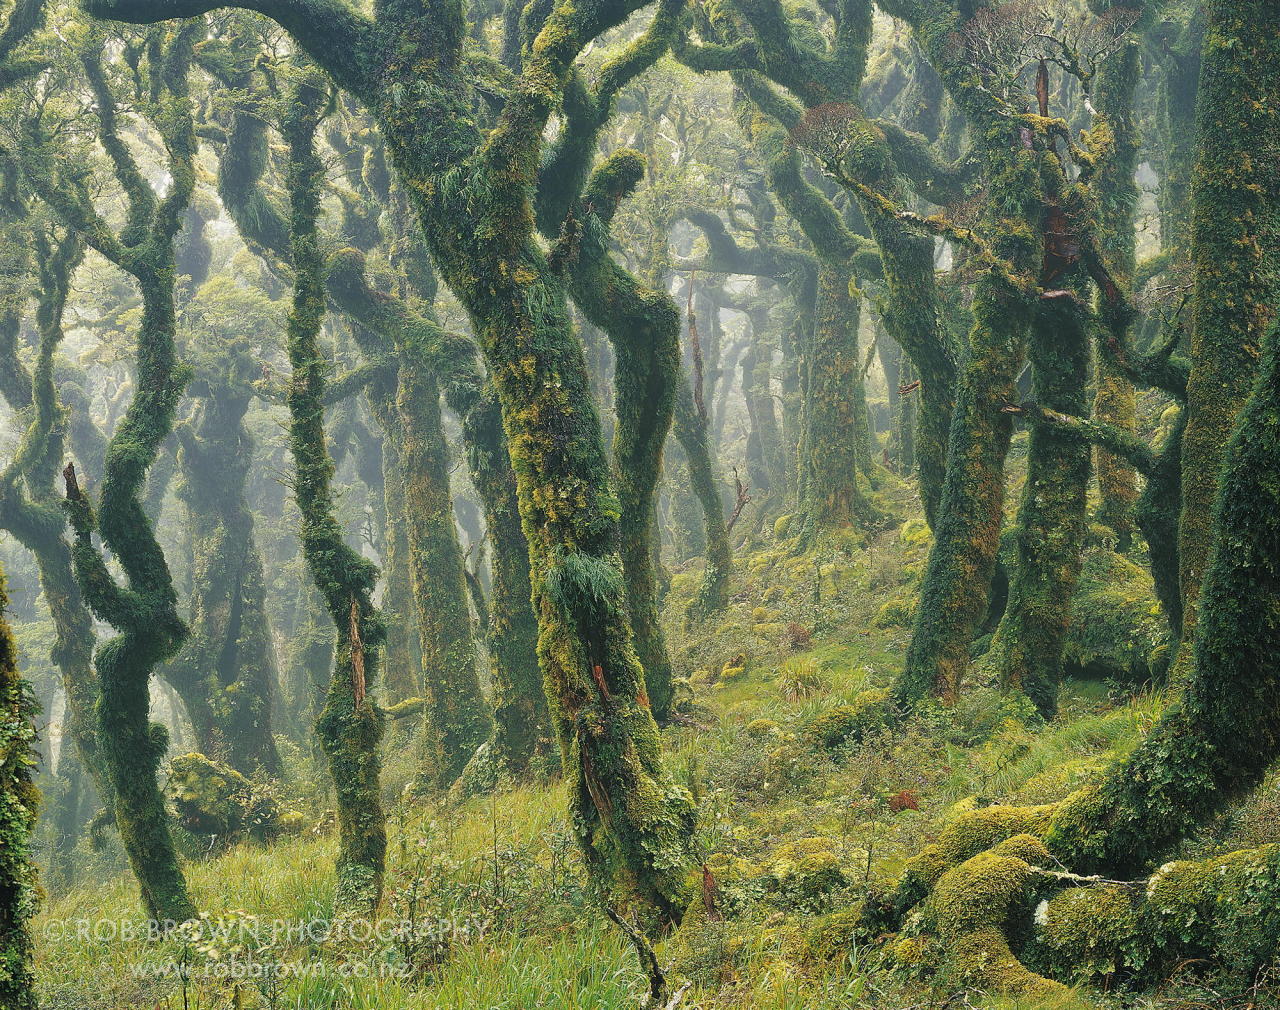 "Cloud Forest" - mossy Tararua Forest Park, New Zealand - Photo by Rob Brown